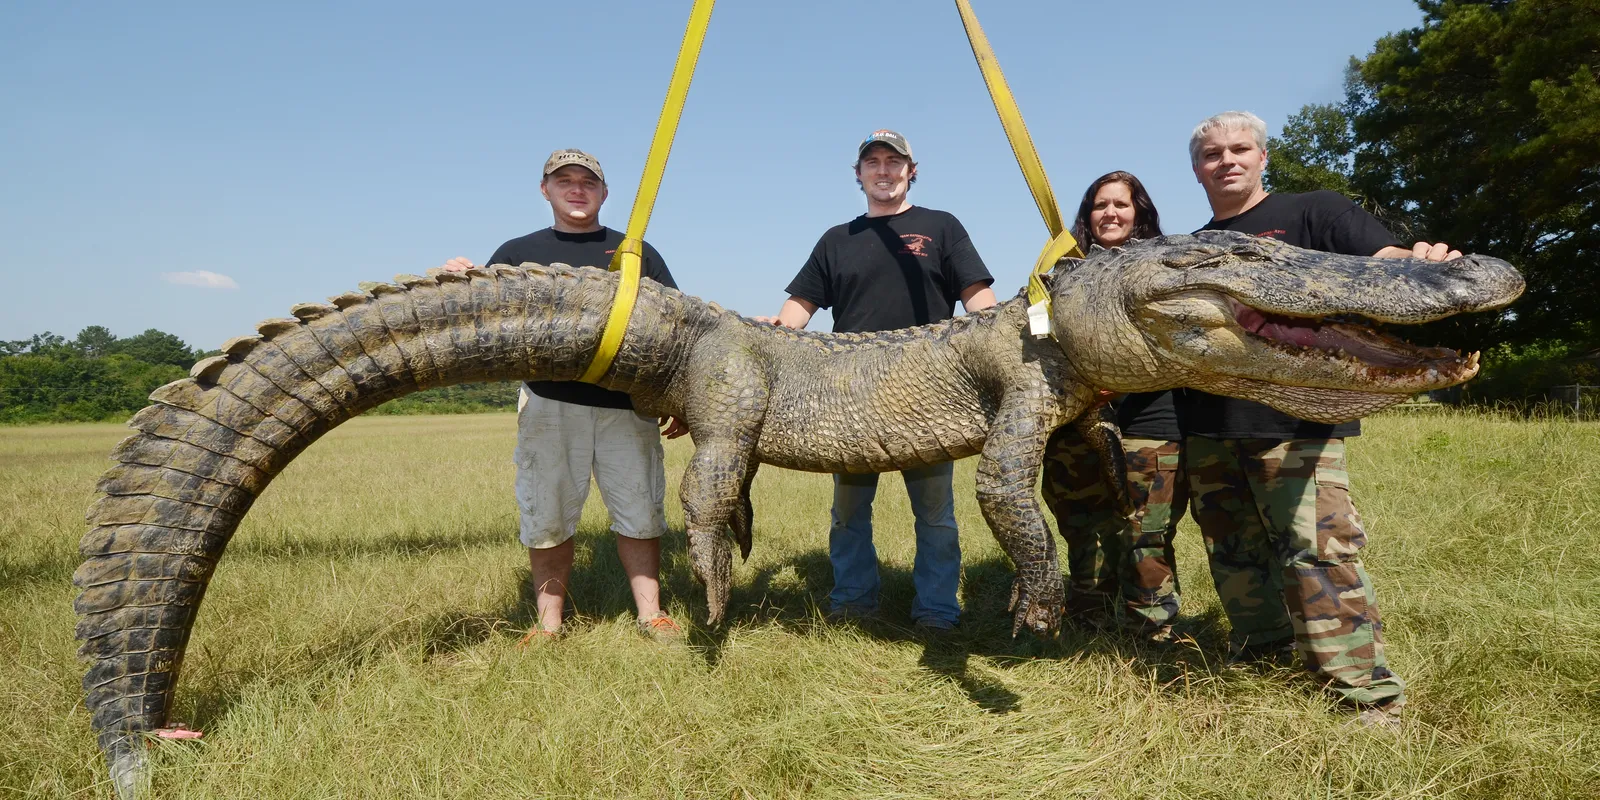 Two gigantic alligators were caught in Mississippi, the largest weighing 727 pounds